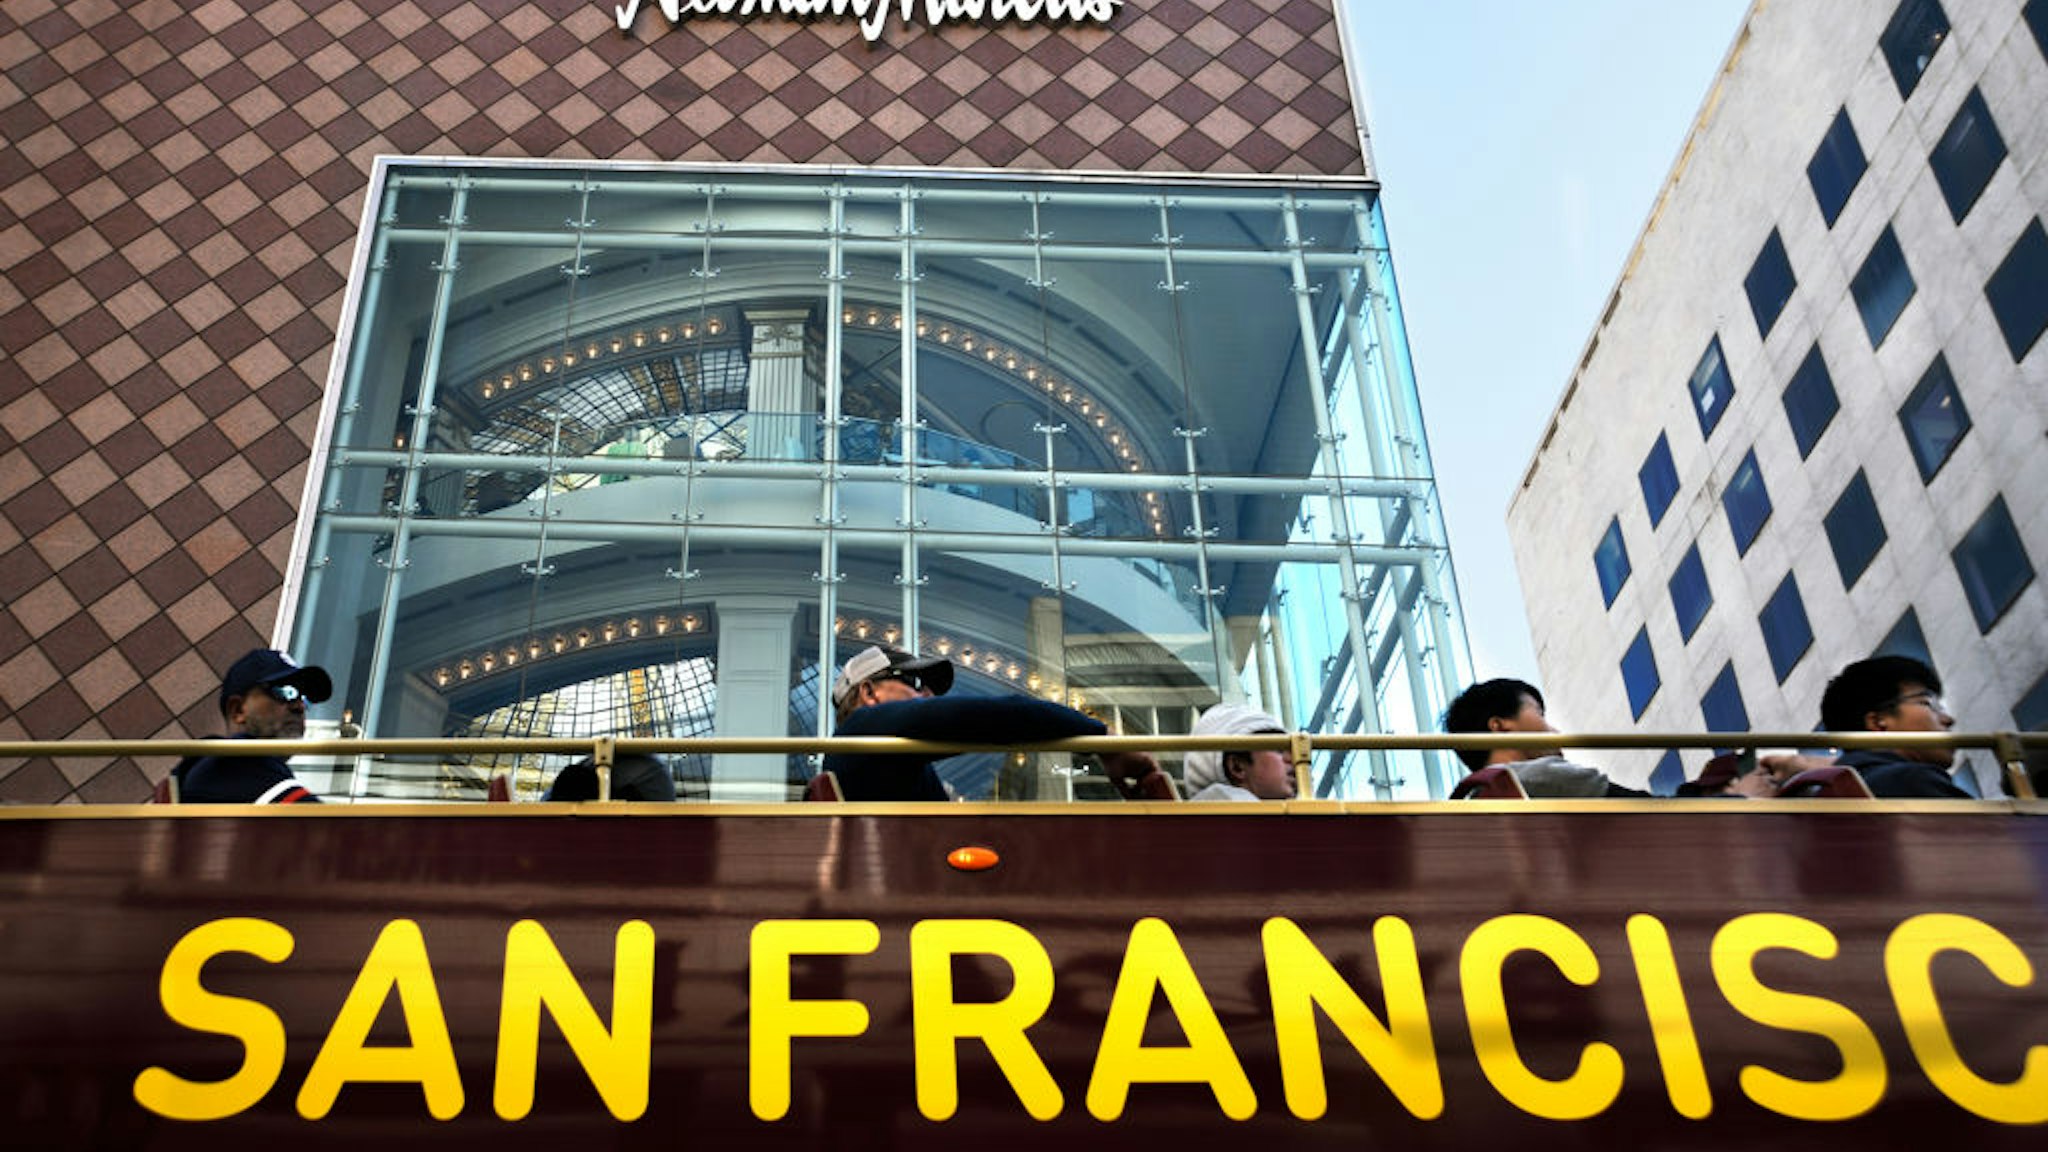 SAN FRANCISCO, CALIFORNIA - SEPTEMBER 13, 2018: Tourists ride a sightseeing bus past a Neiman Marcus store in San Francisco, California. (Photo by Robert Alexander/Getty Images)